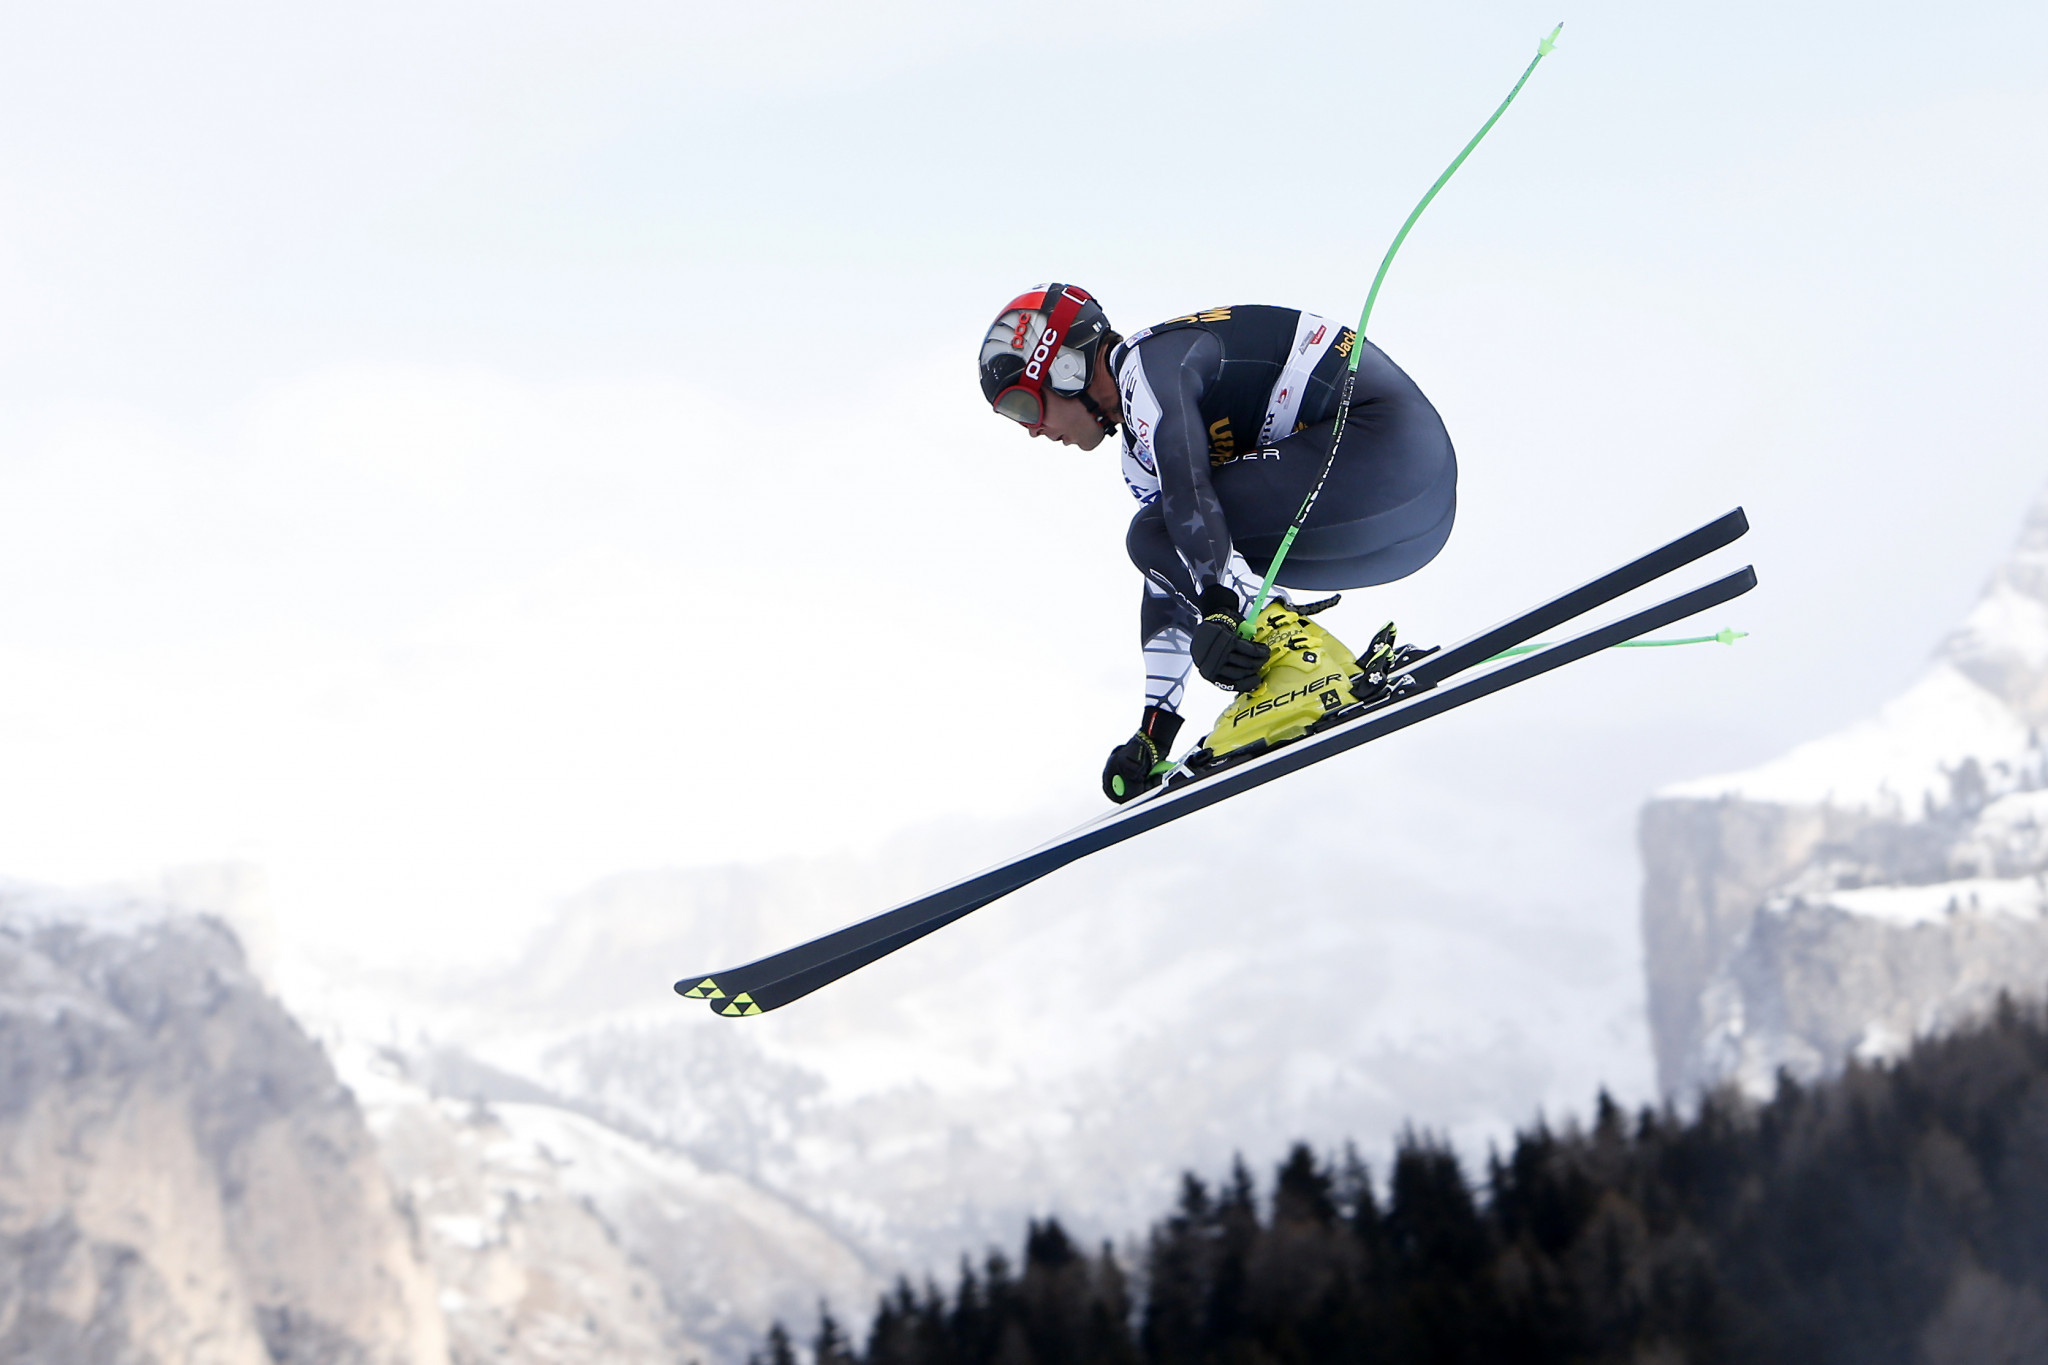 Steven Nyman of the United States - whose three World Cup career wins have come in the downhill at the Val Gardena venue - was second in today's training run ©Getty Images